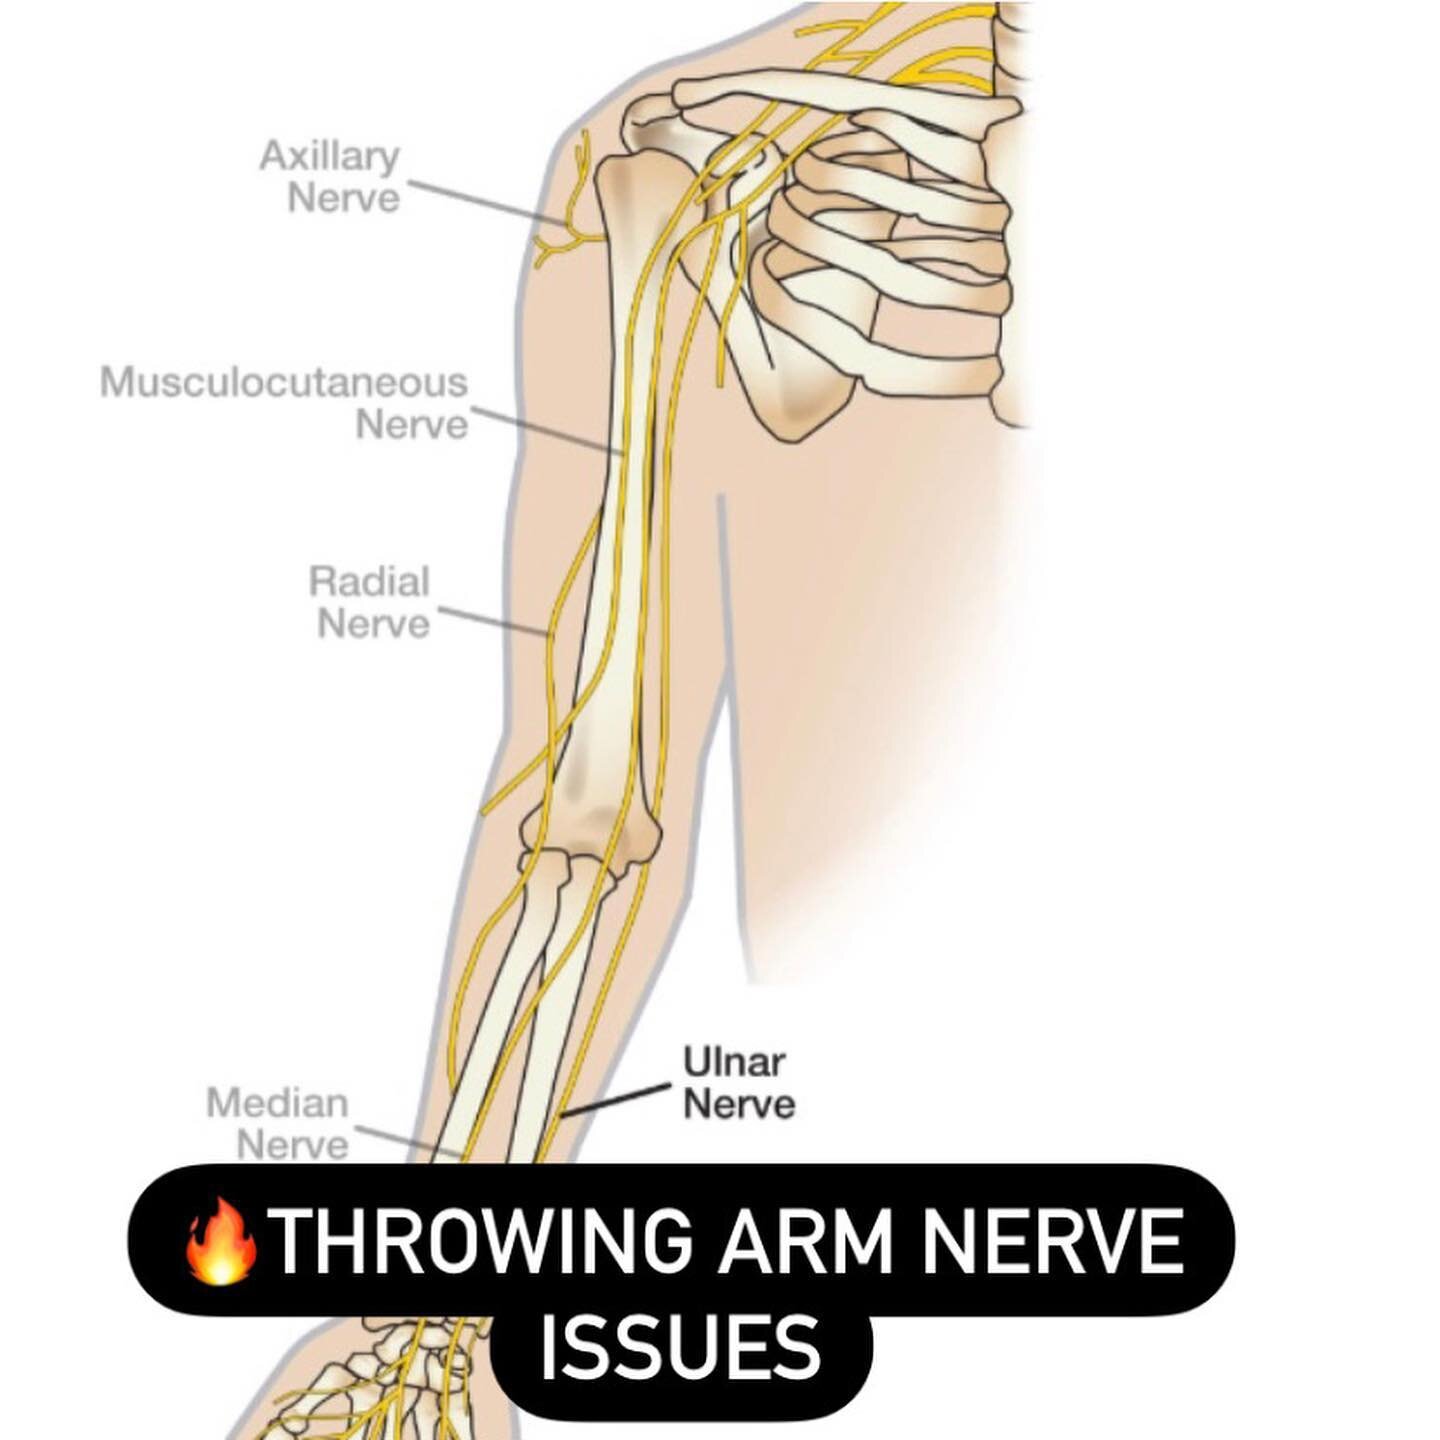 🔥 There are a TON of different Nerve issues that can arise in the throwing arm

Here are the most common issues we see:

✅ Brachial Plexus Traction (Low Sitting Shoulder)

✅ Compression at Scalenes/Pec Minor

✅ Ulnar N: Arcade Of Struthers (Triceps 